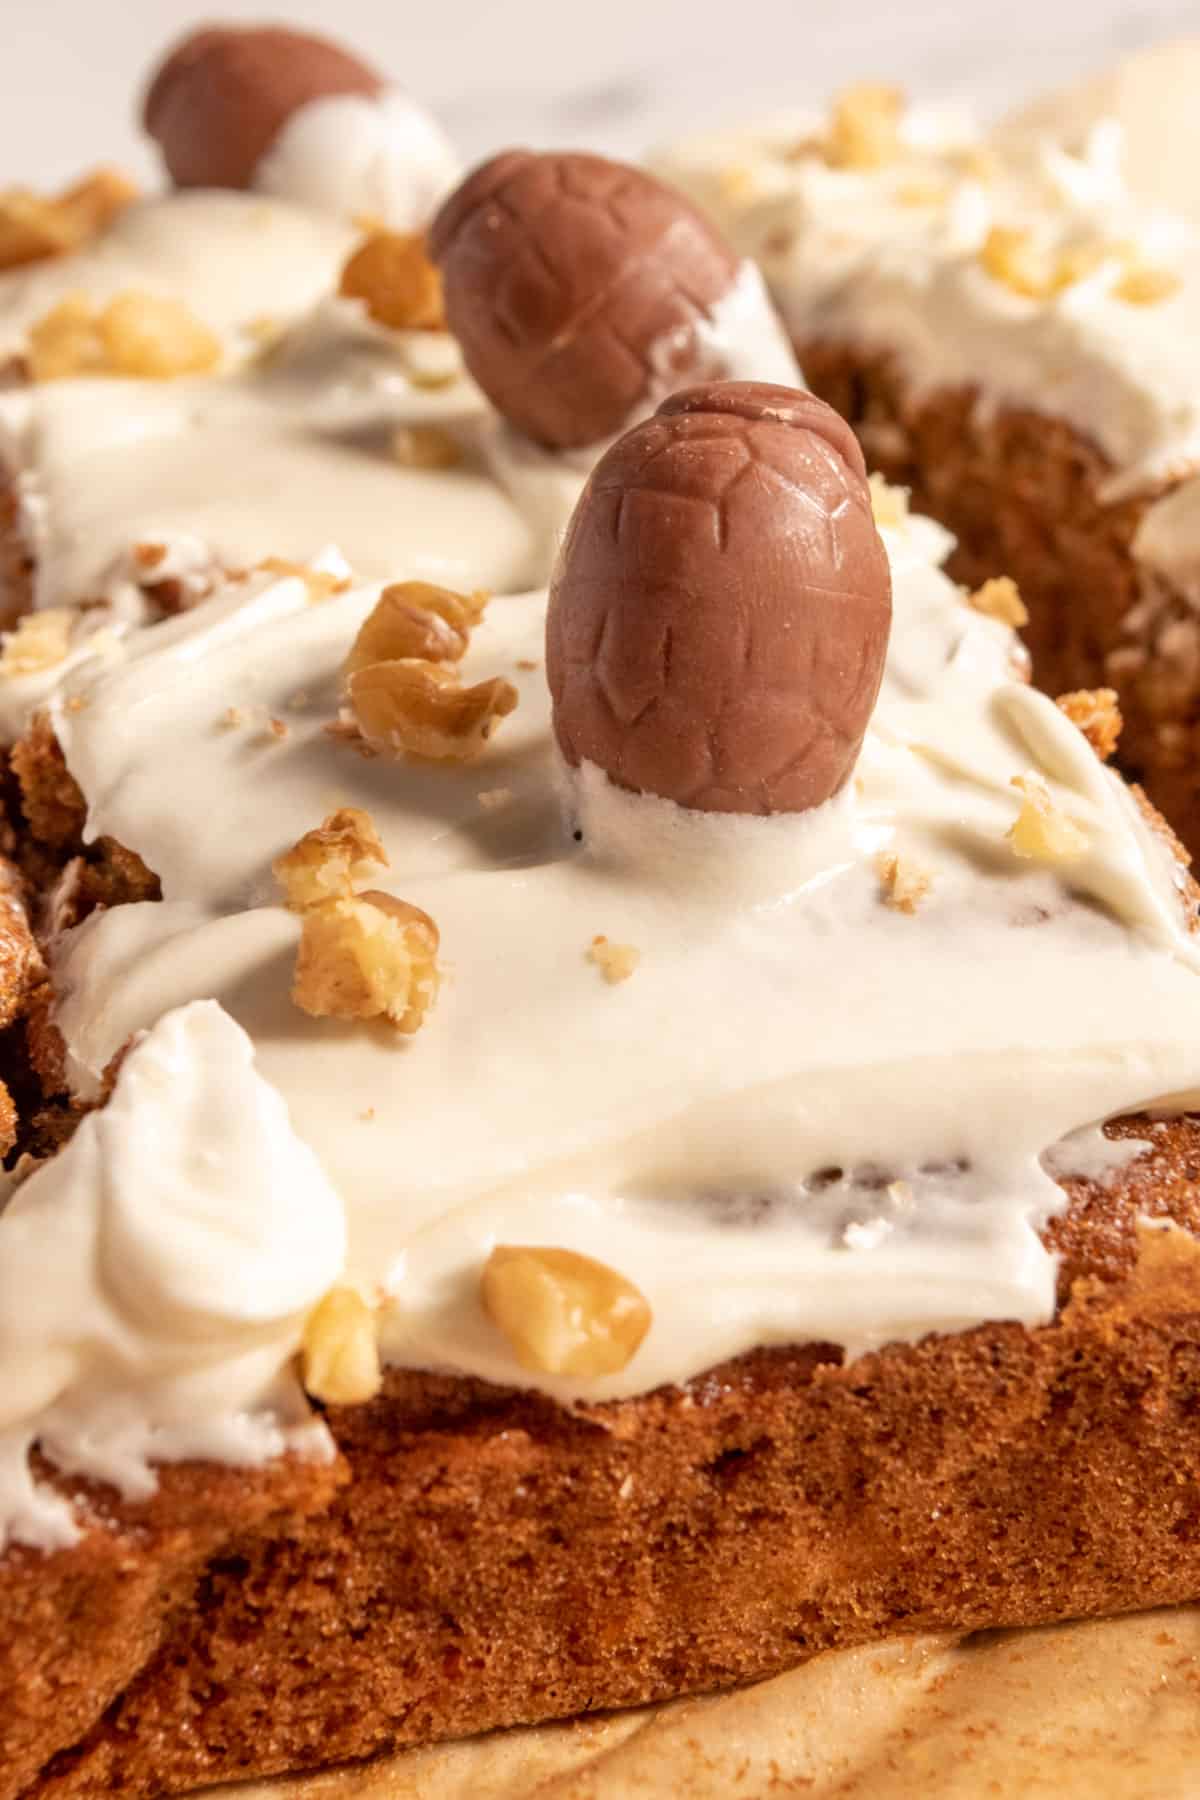 Many vegan carrot cake slices are topped with mini chocolate easter eggs and chopped walnuts.